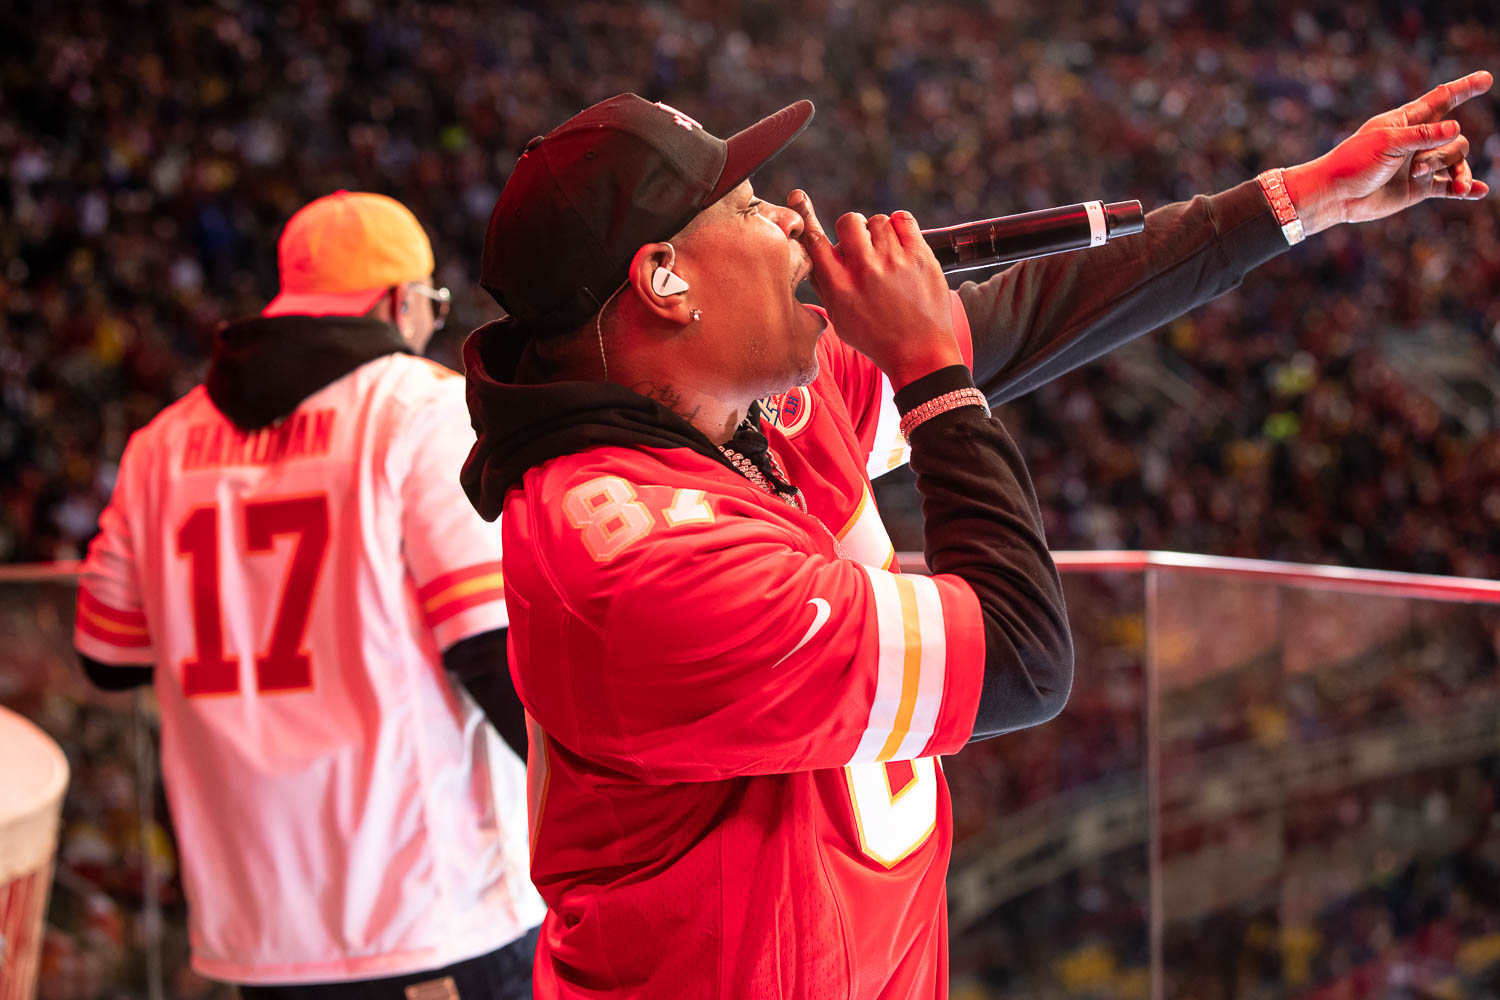 City Spud performing with Nelly at halftime during the divisional playoff football game between the Kansas City Chiefs and the Buffalo Bills, Sunday, January 23, 2022 in Kansas City.